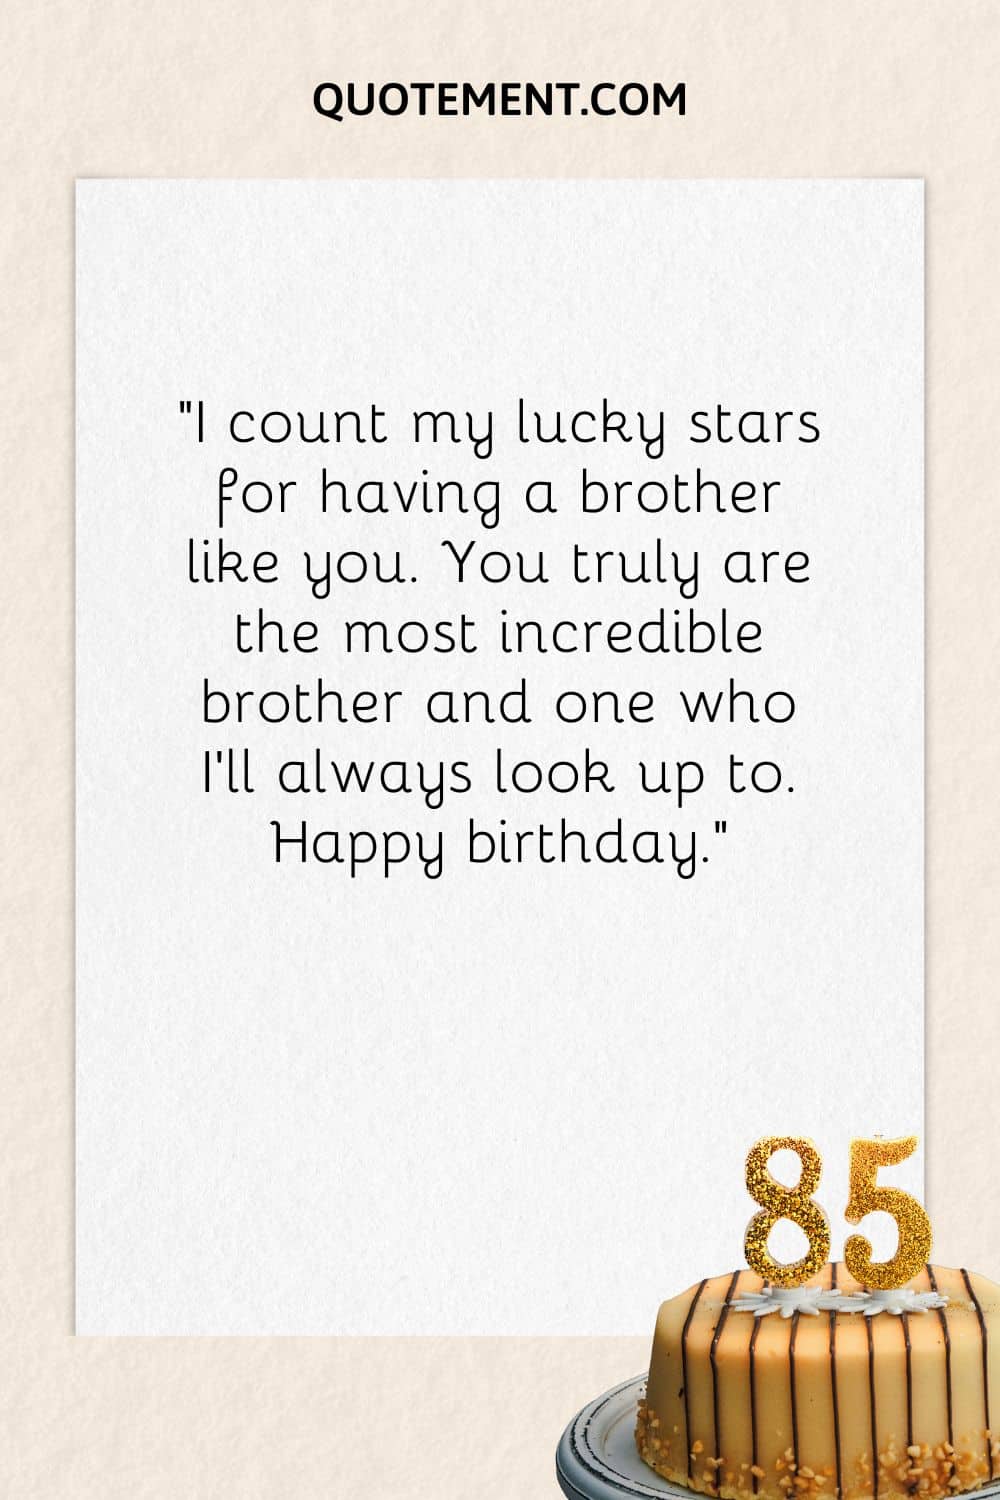 “I count my lucky stars for having a brother like you. You truly are the most incredible brother and one who I’ll always look up to. Happy birthday.”